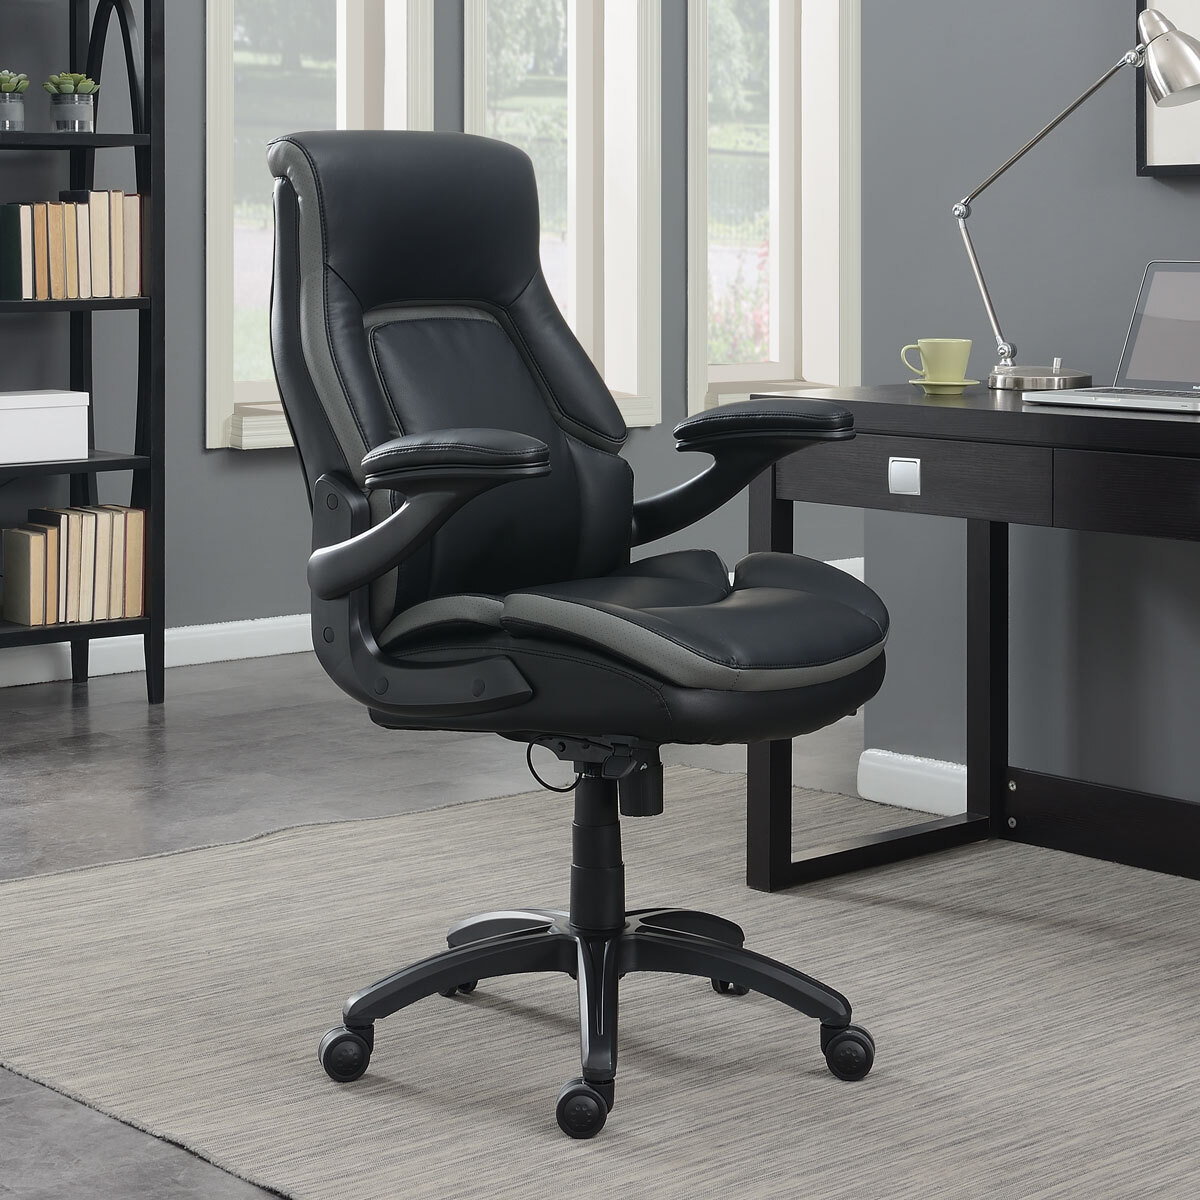 True Innovations Octaspring Manager's Office Chair | Cost...